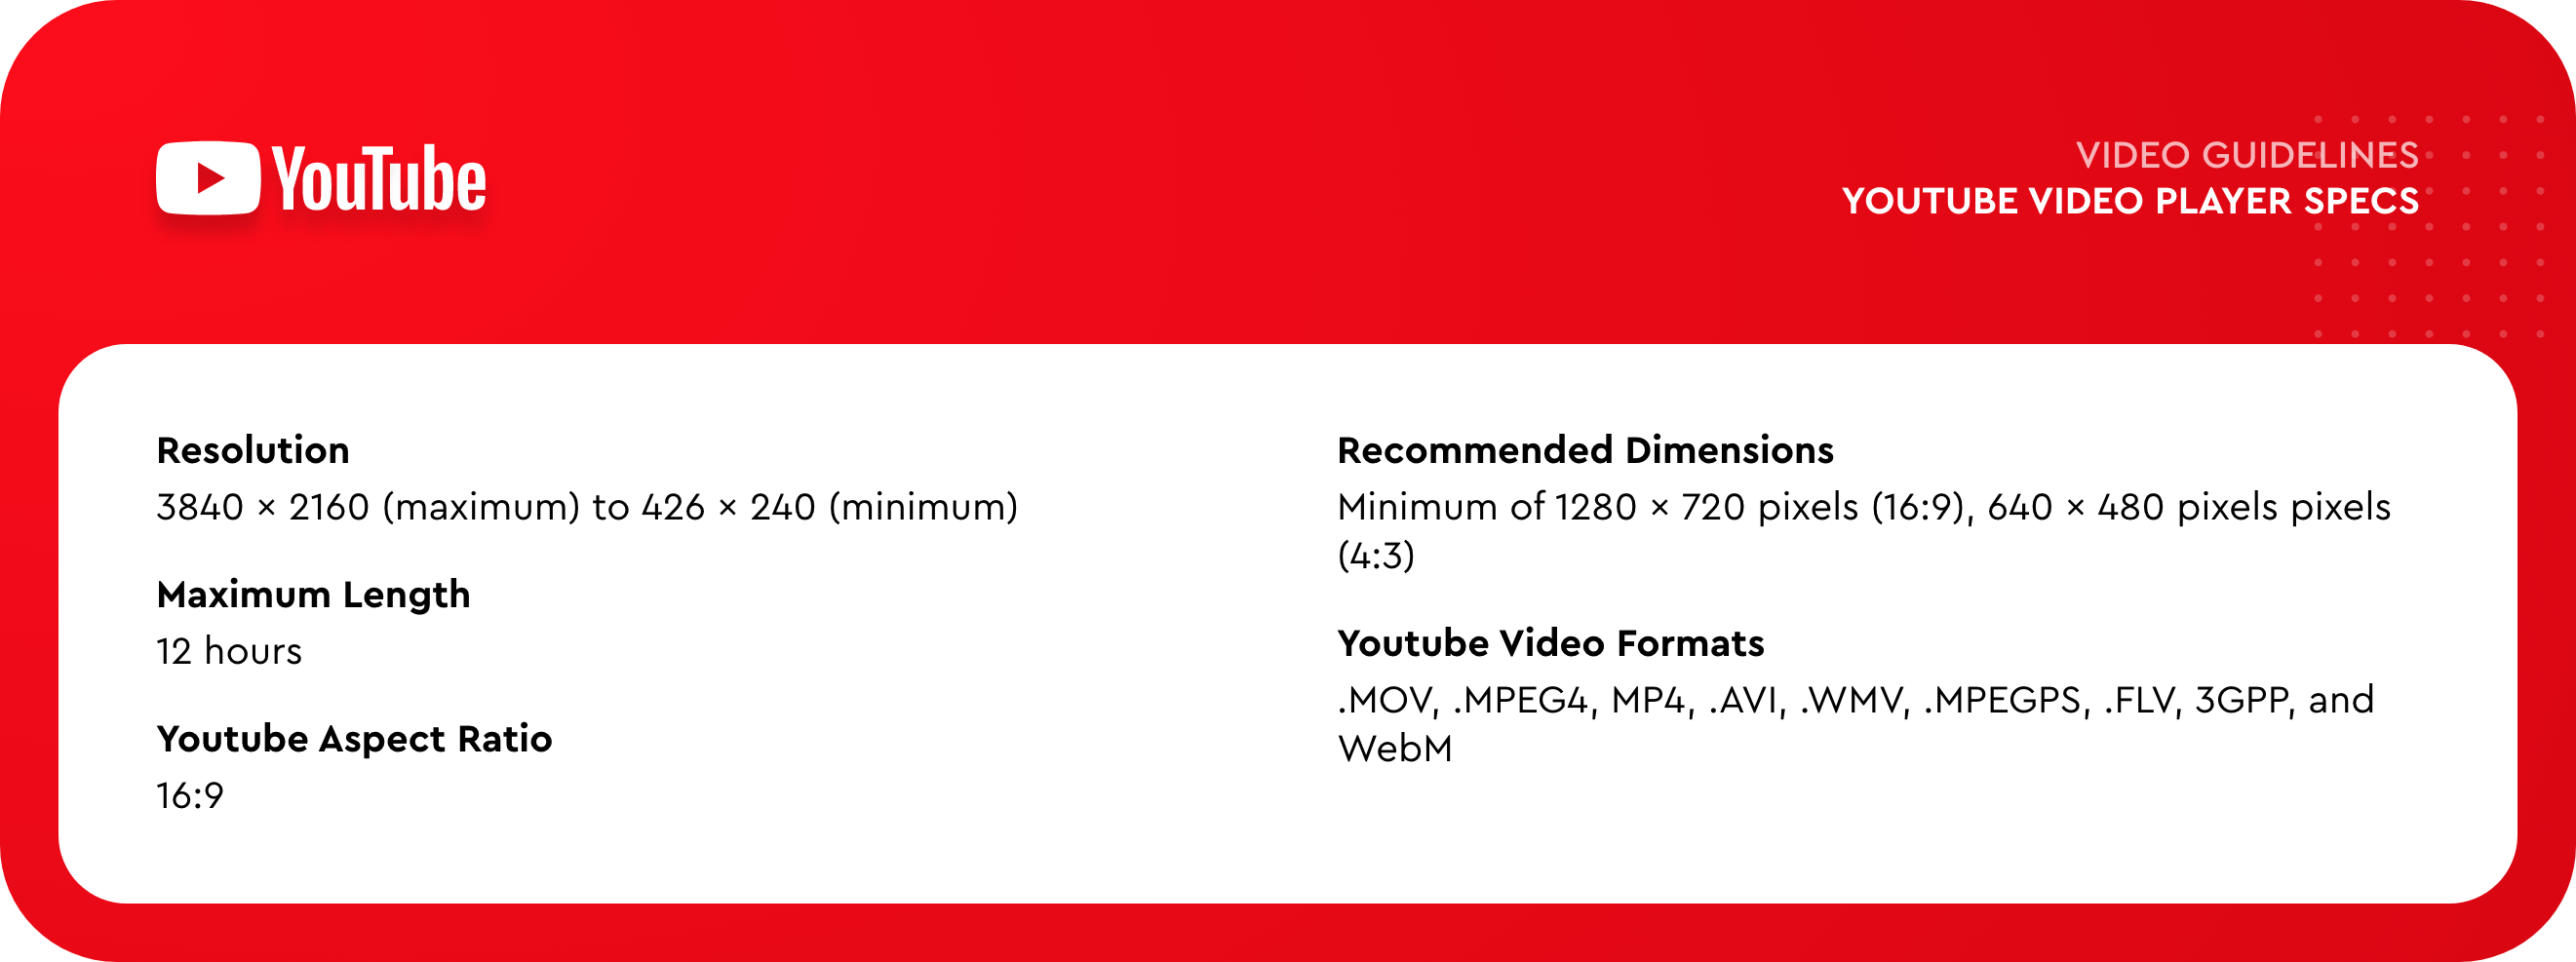 youtube video size